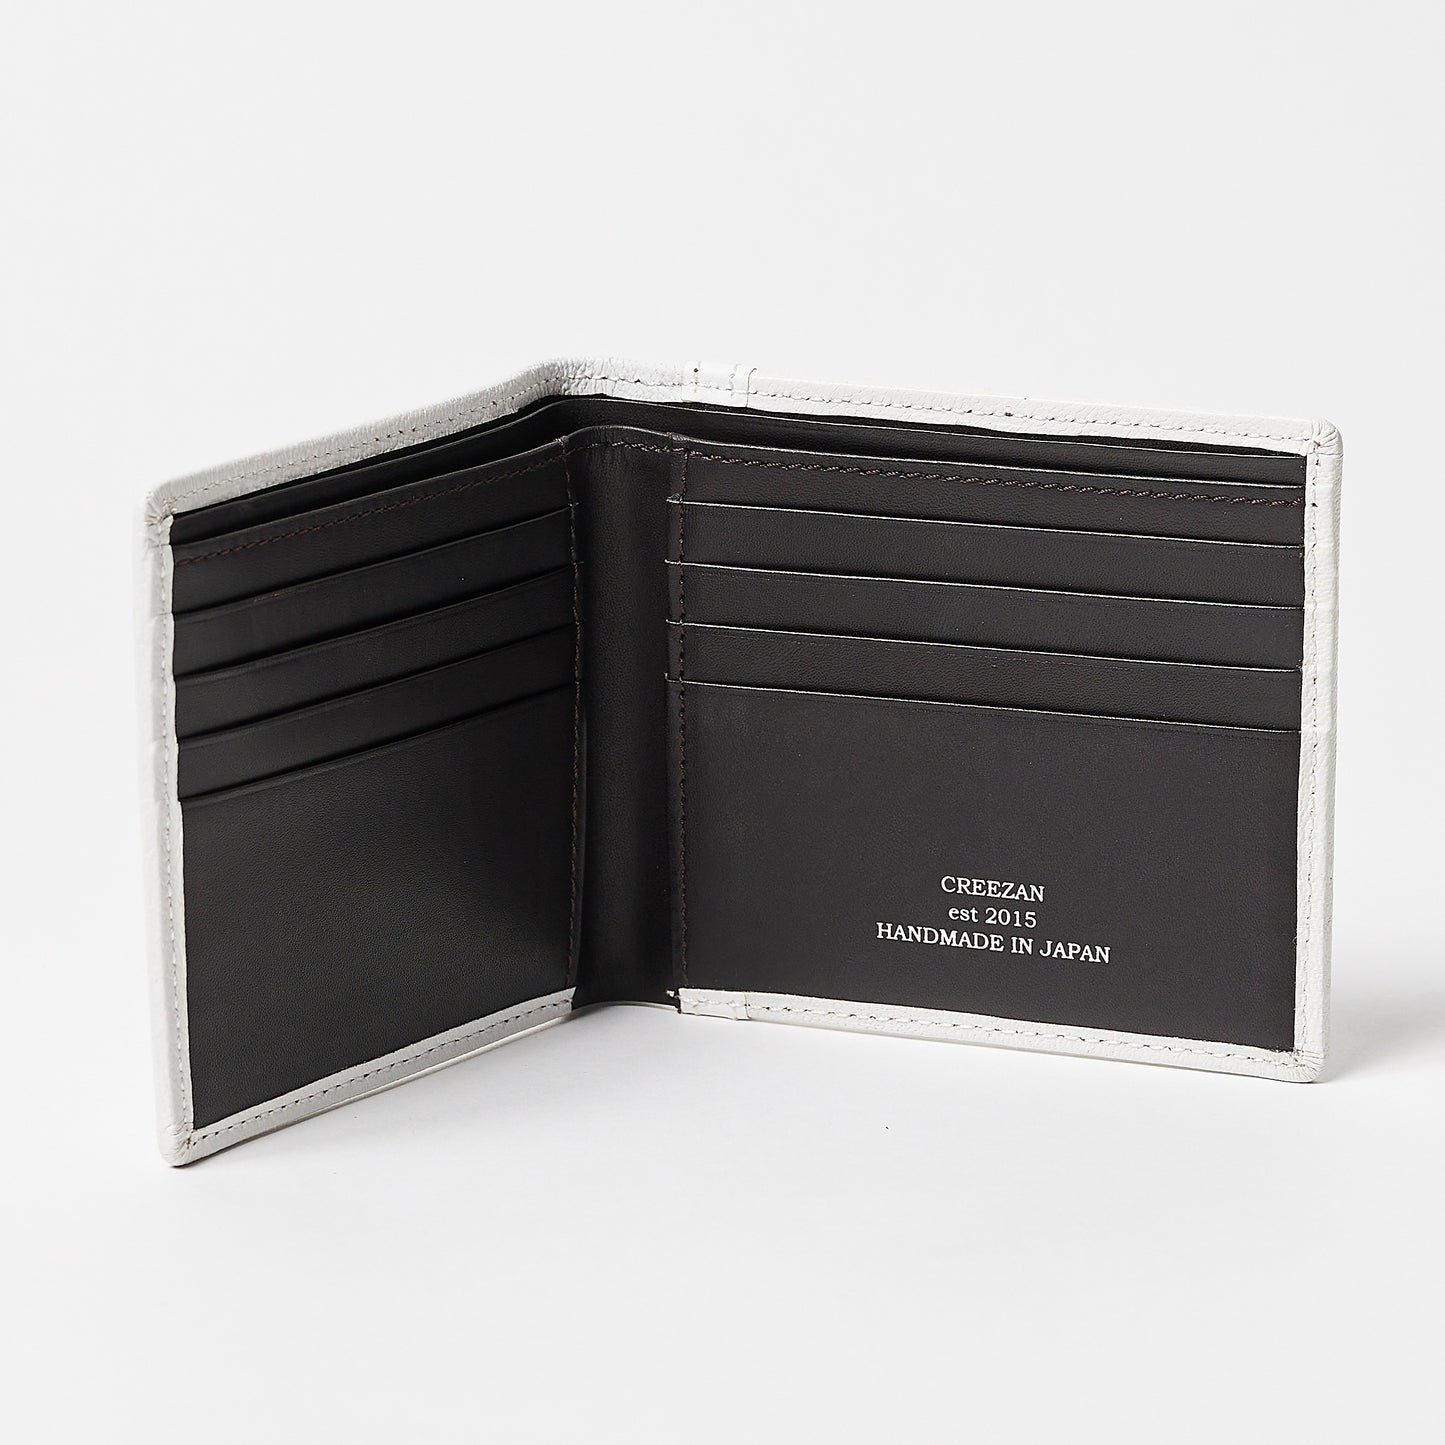 Sufficient number of card holders